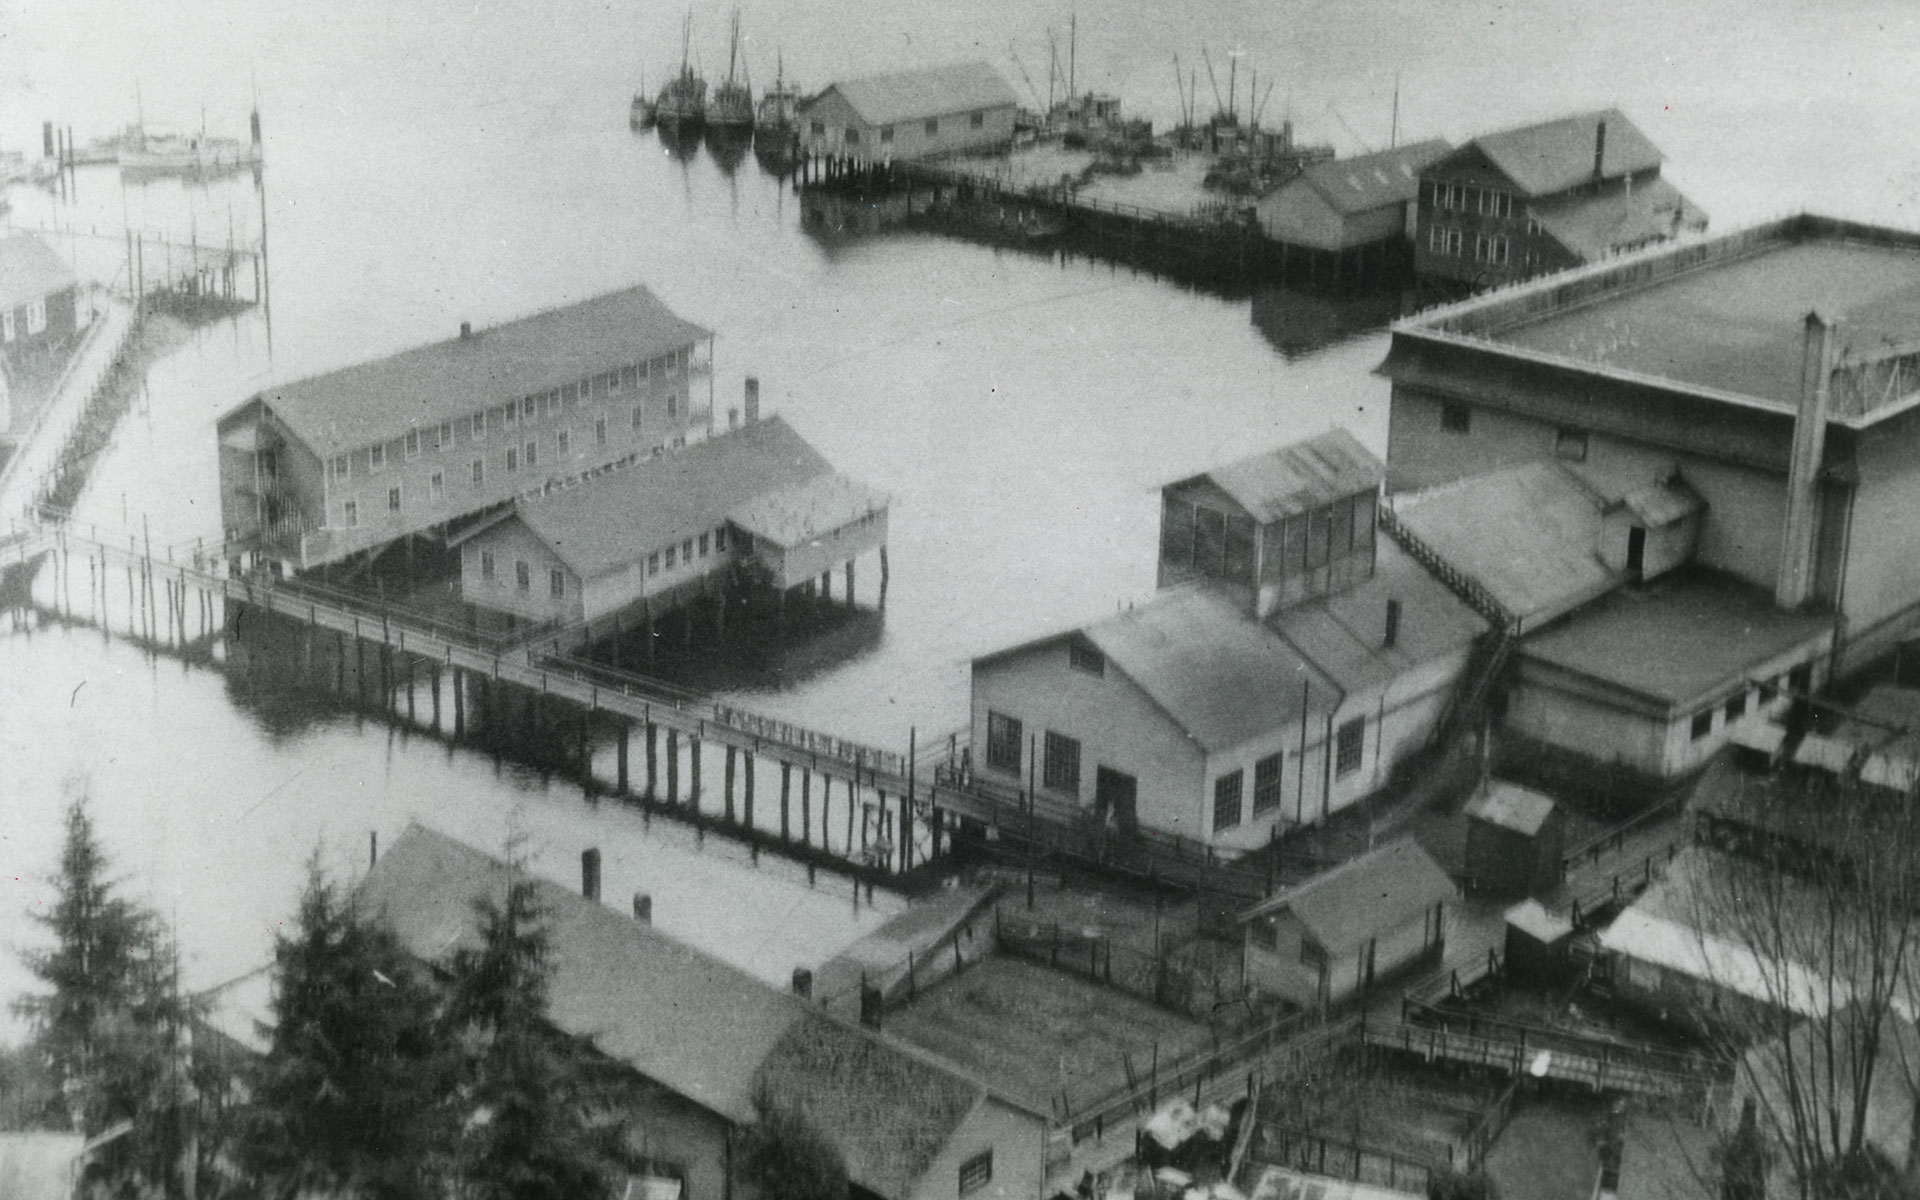 Kildonan Cannery buildings viewed from above showing the buildings and wharves extending over the water